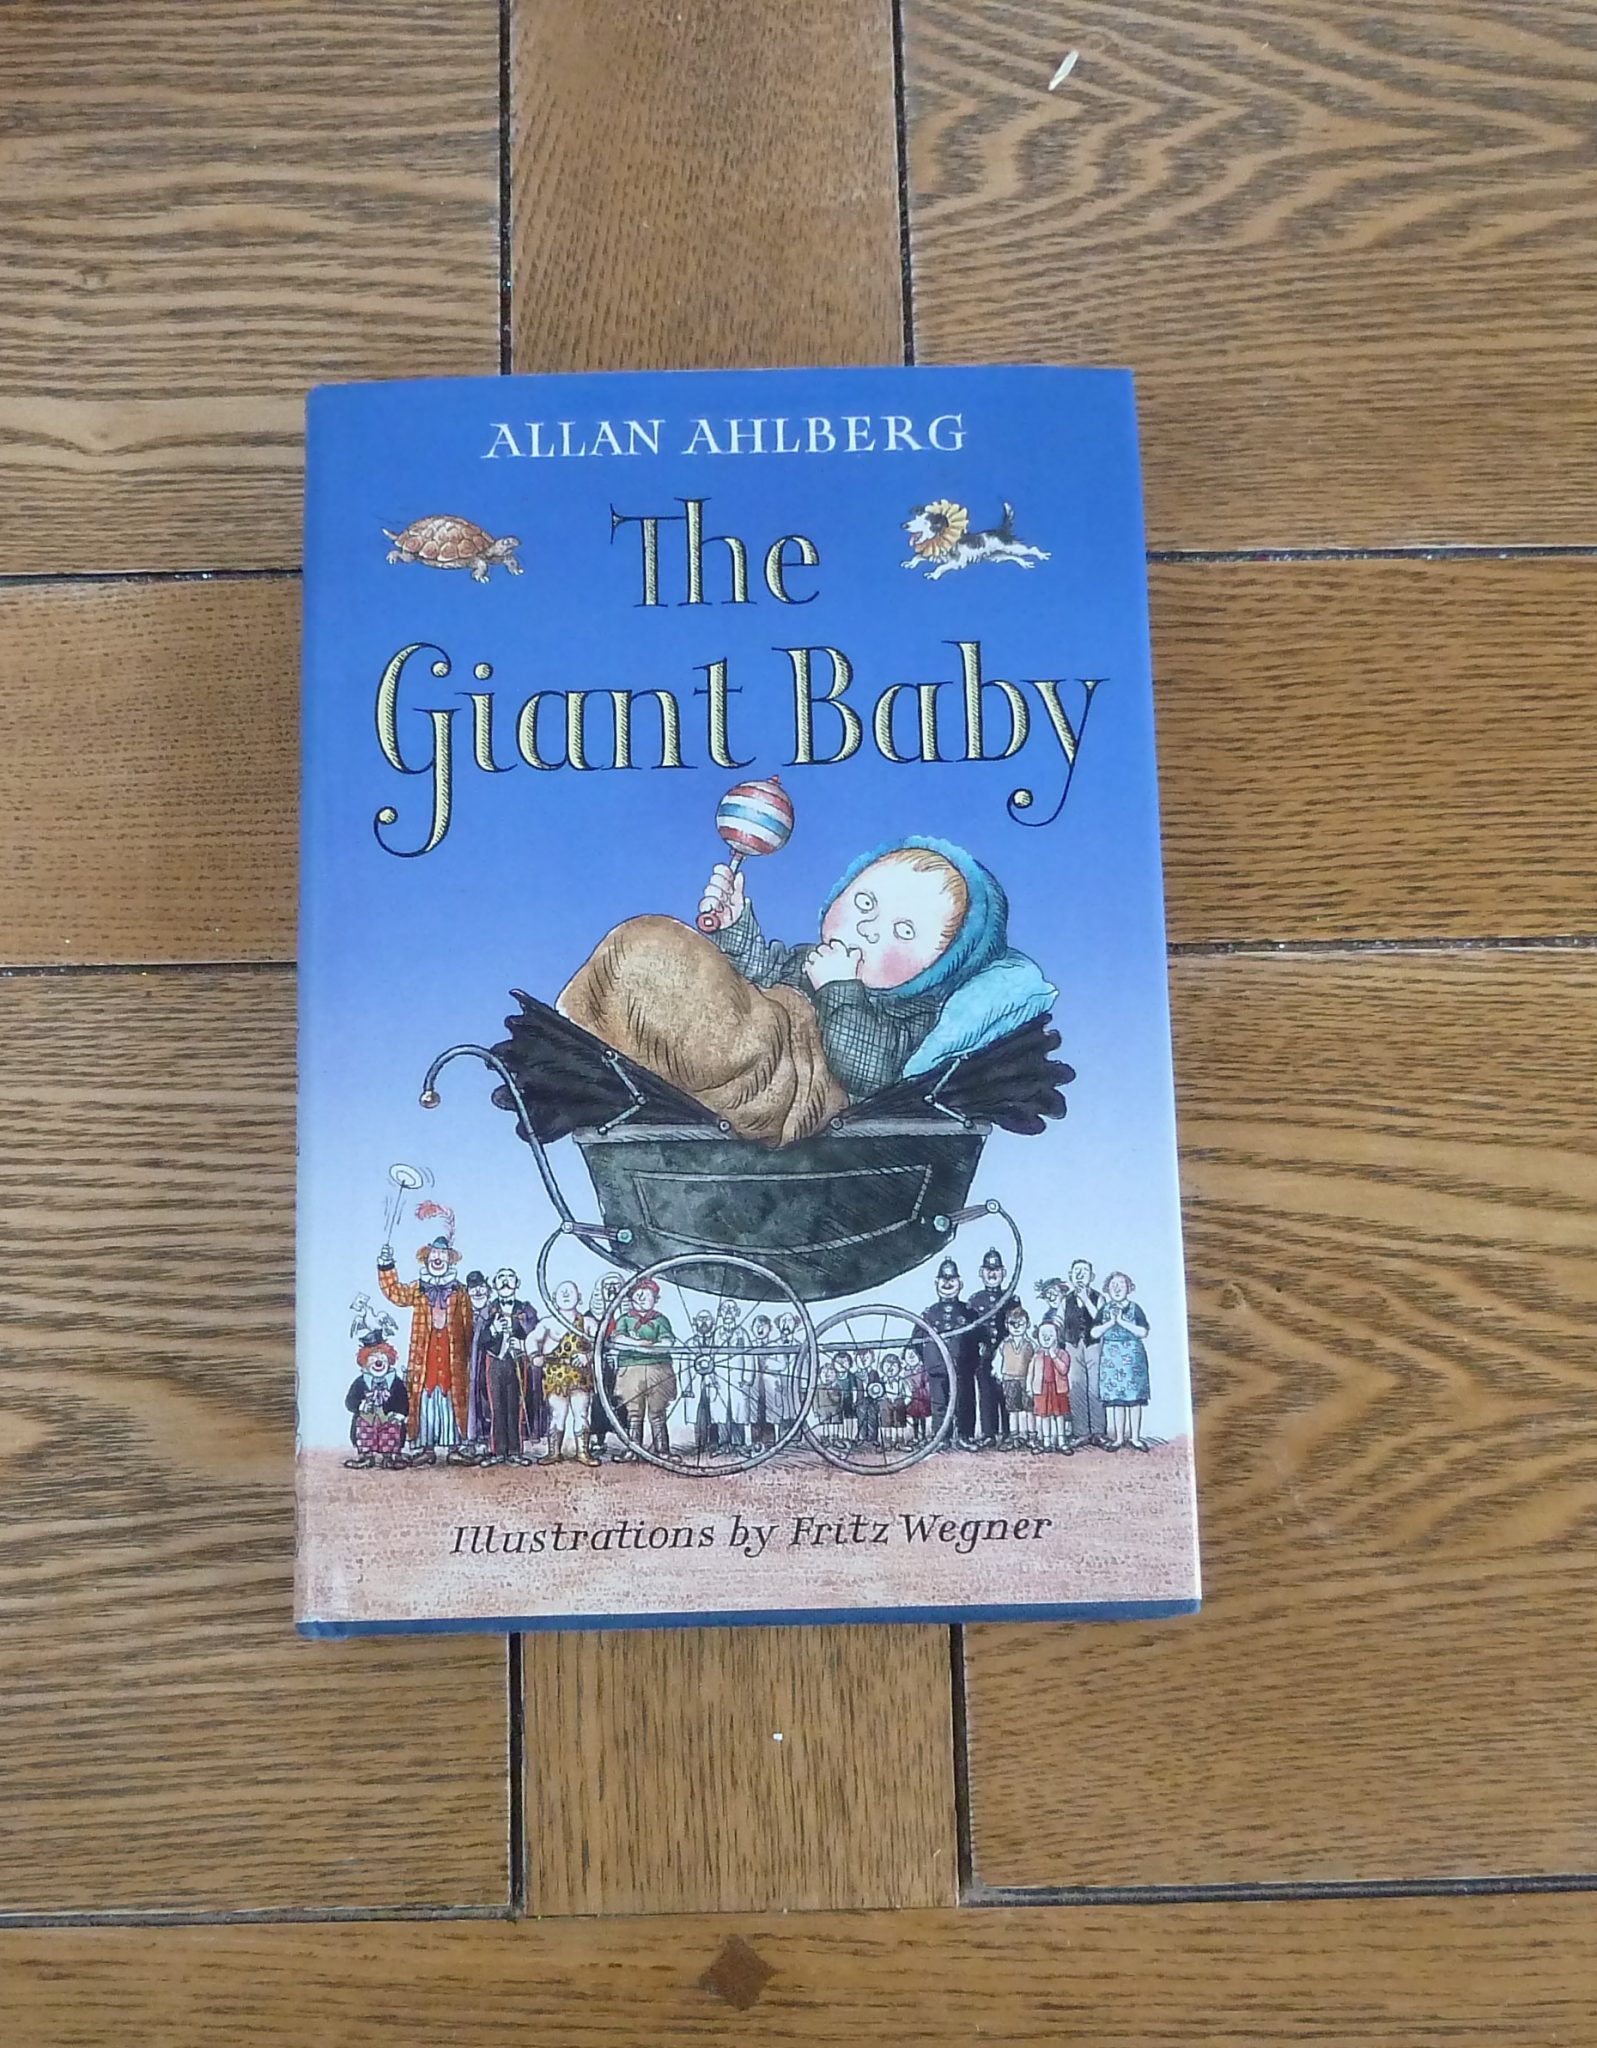 The Giant Baby by Allan Ahlberg